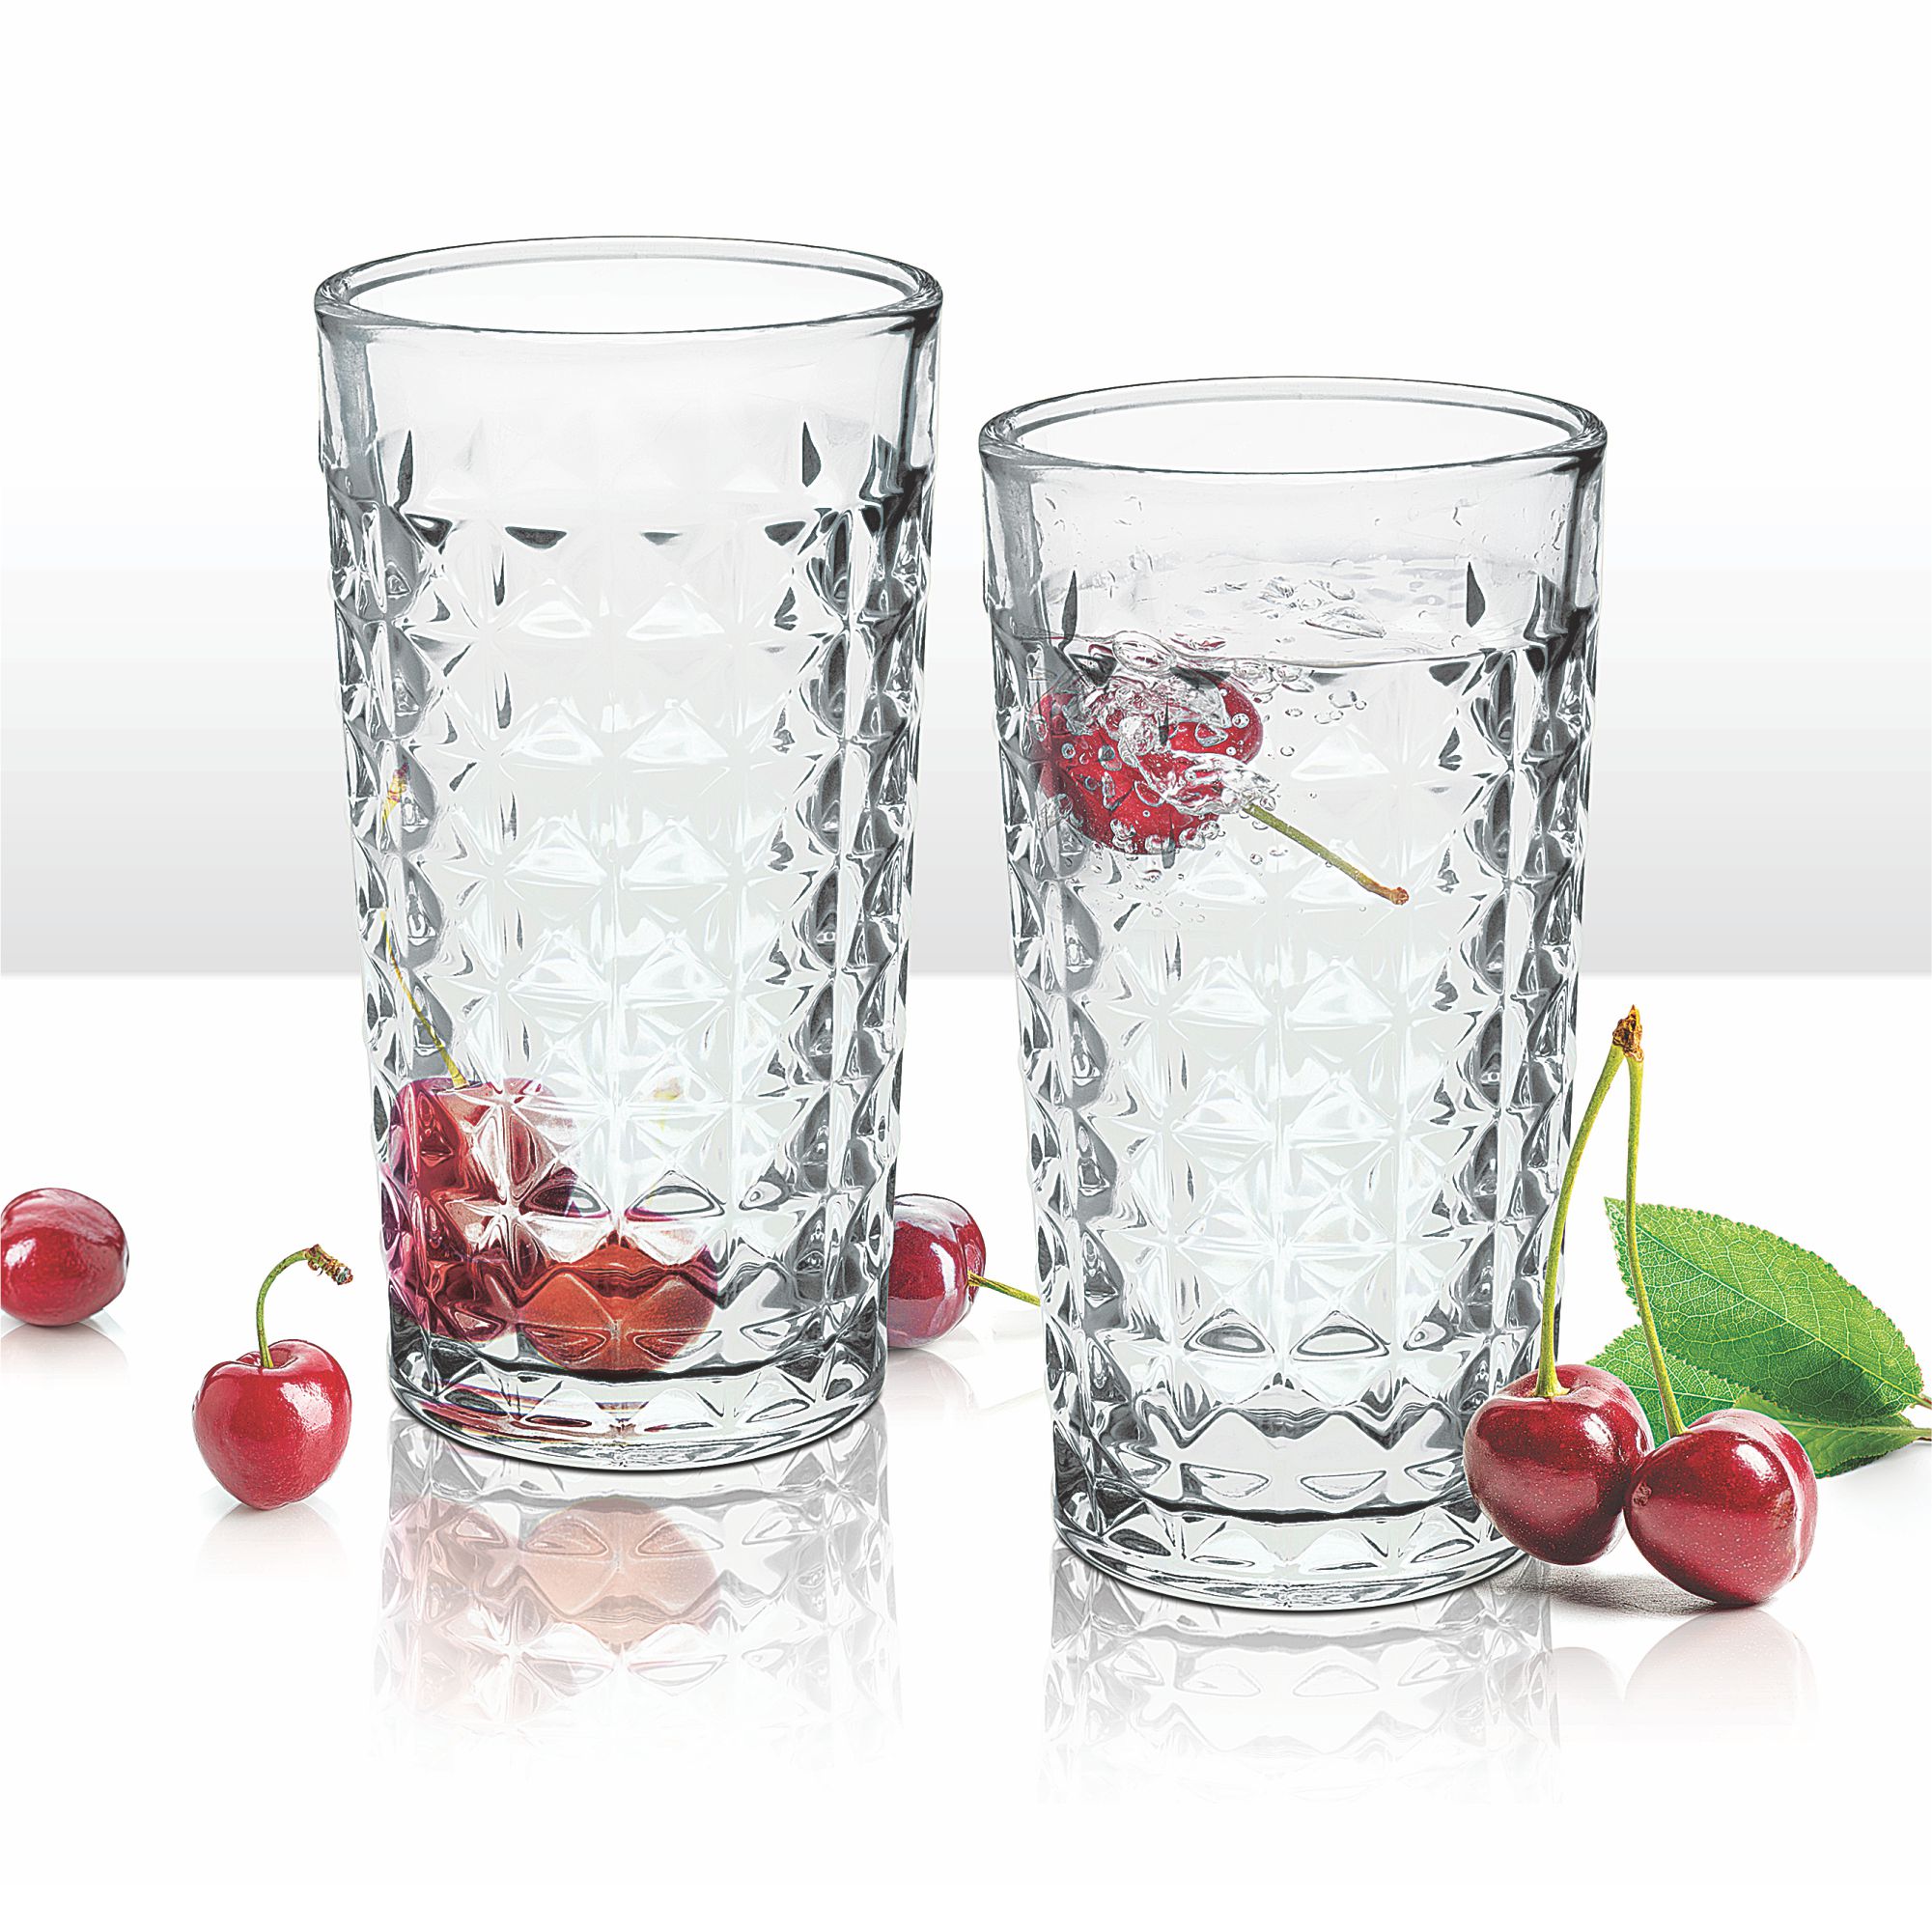 Treo Knitts Cool Water Glass Tumbler